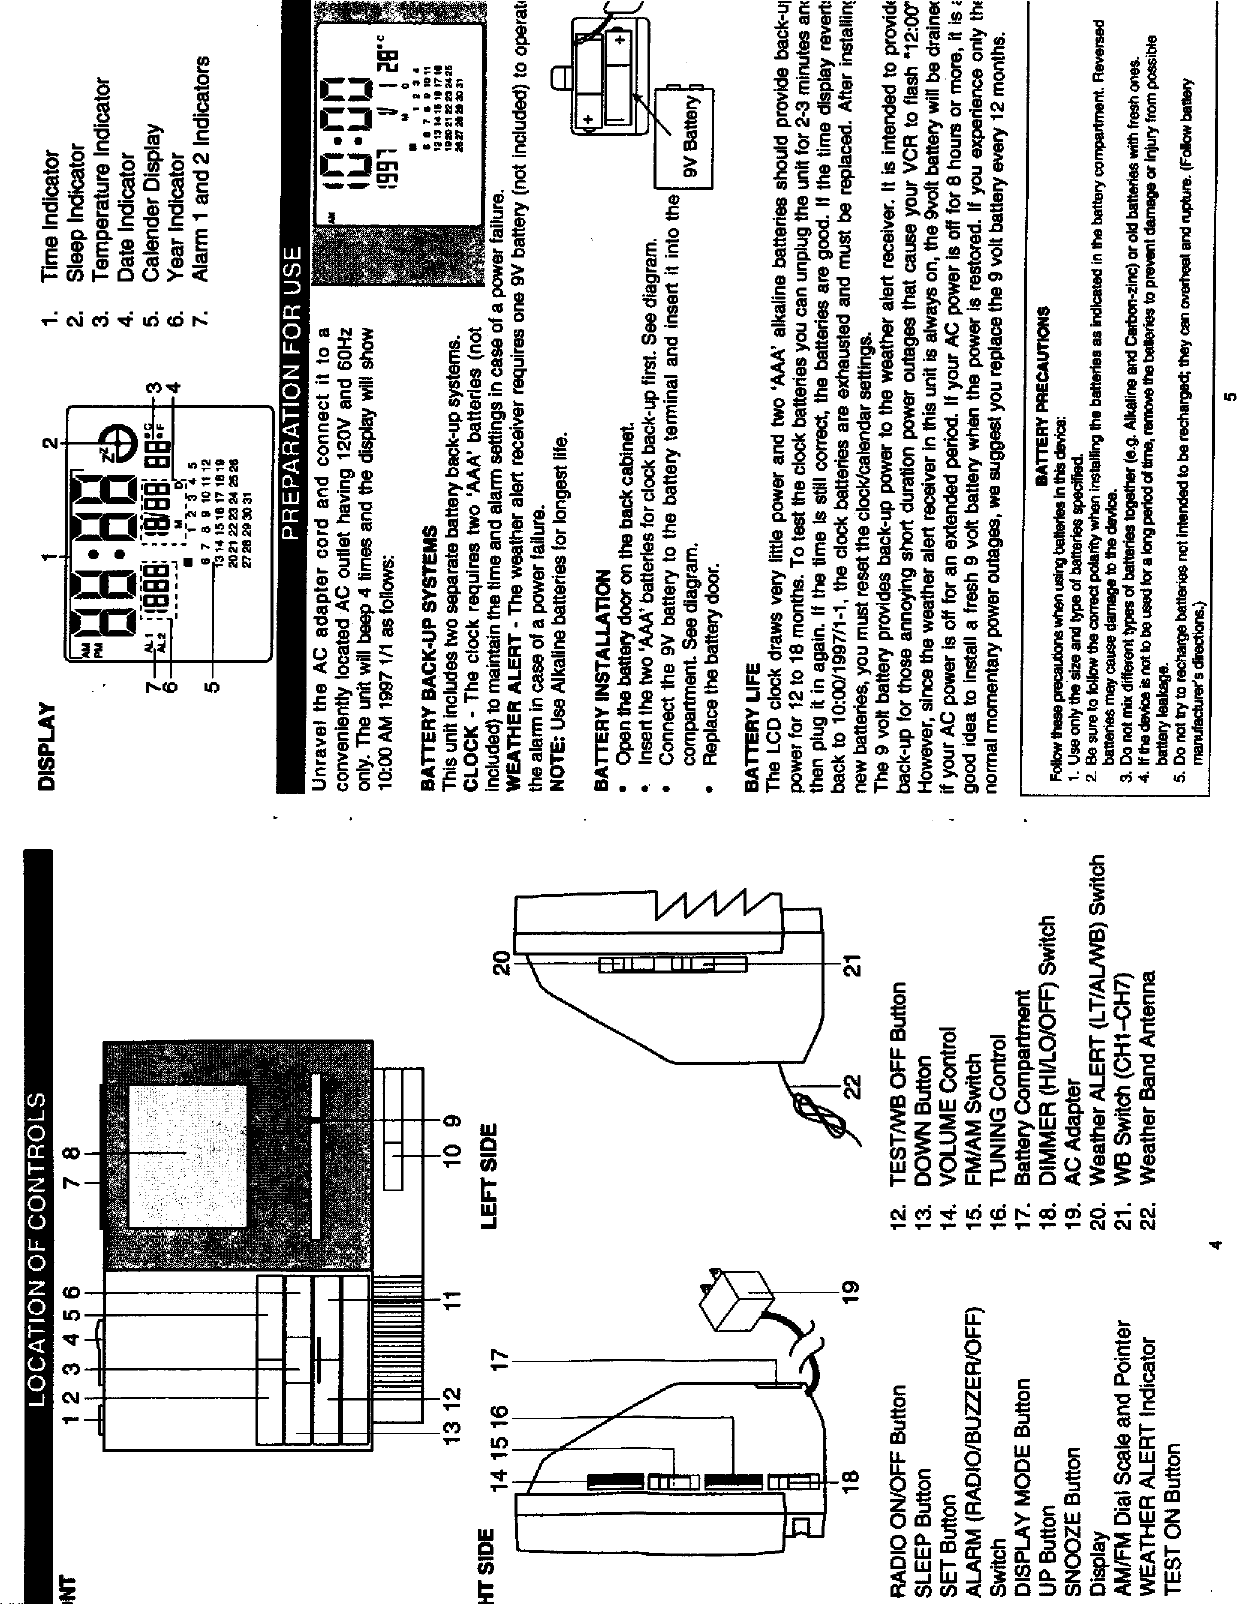 Page 4 of 11 - Emerson  File